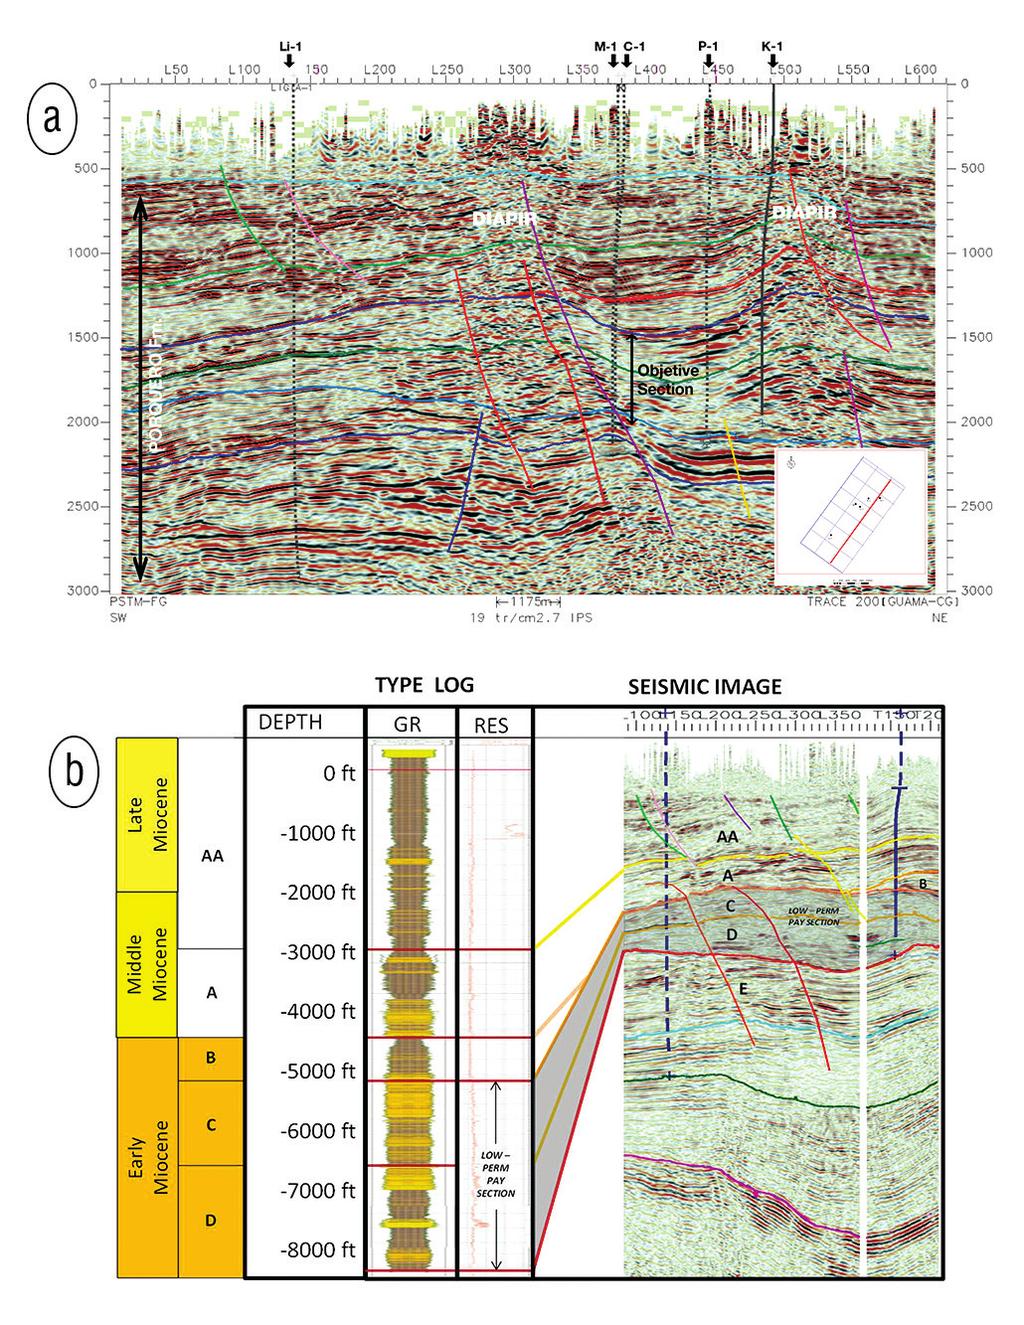 L a t i n A m e r i c a of two shale diapirs interpreted from the new data. The well resulted in the first gas-condensate discovery in the shallow Porquero play.